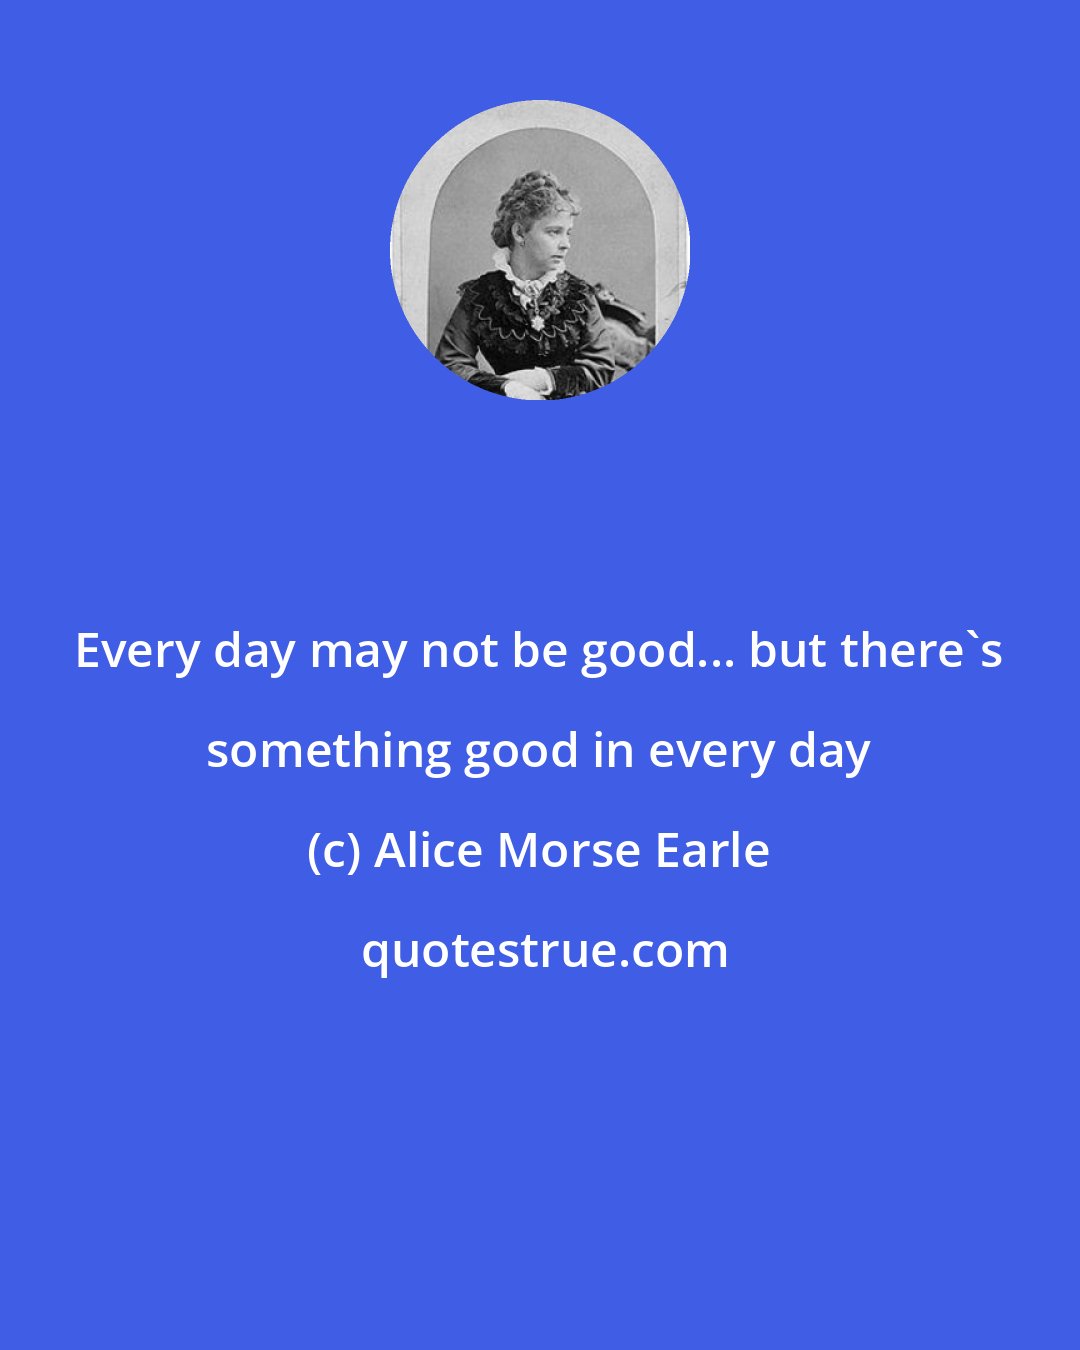 Alice Morse Earle: Every day may not be good... but there's something good in every day